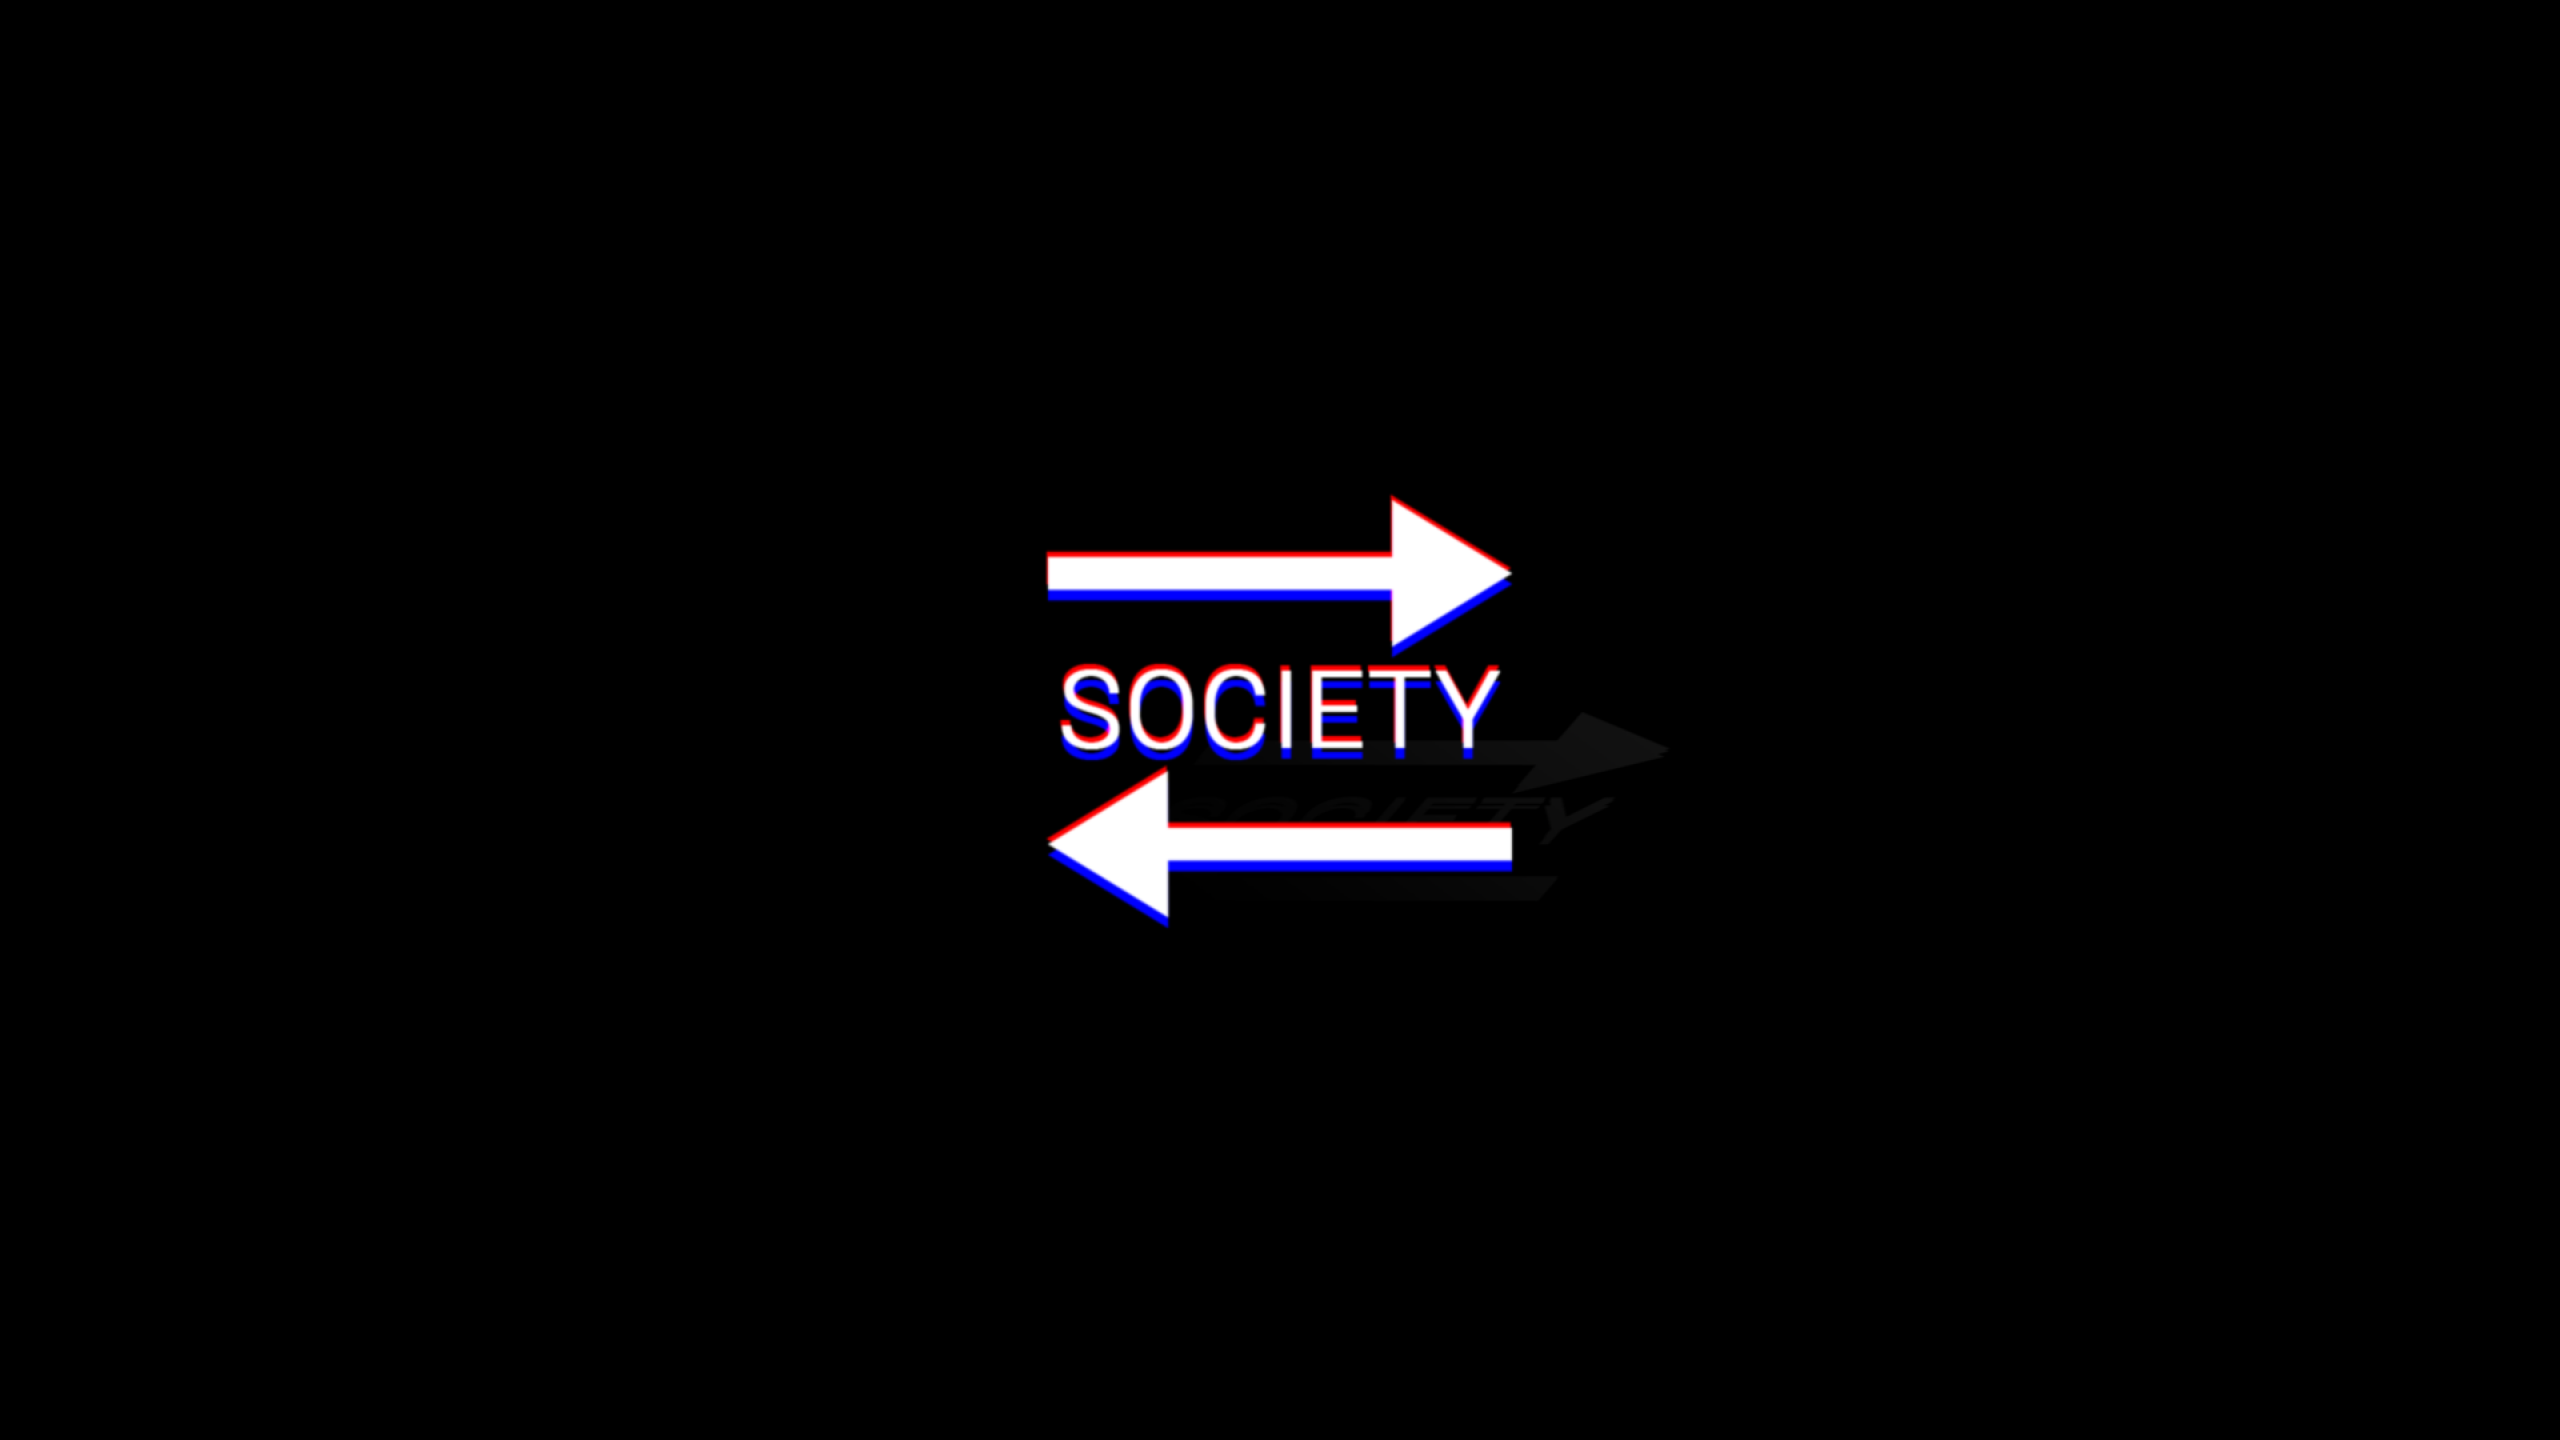 Download 2560x1440 Society, Direction Arrows Wallpaper for iMac